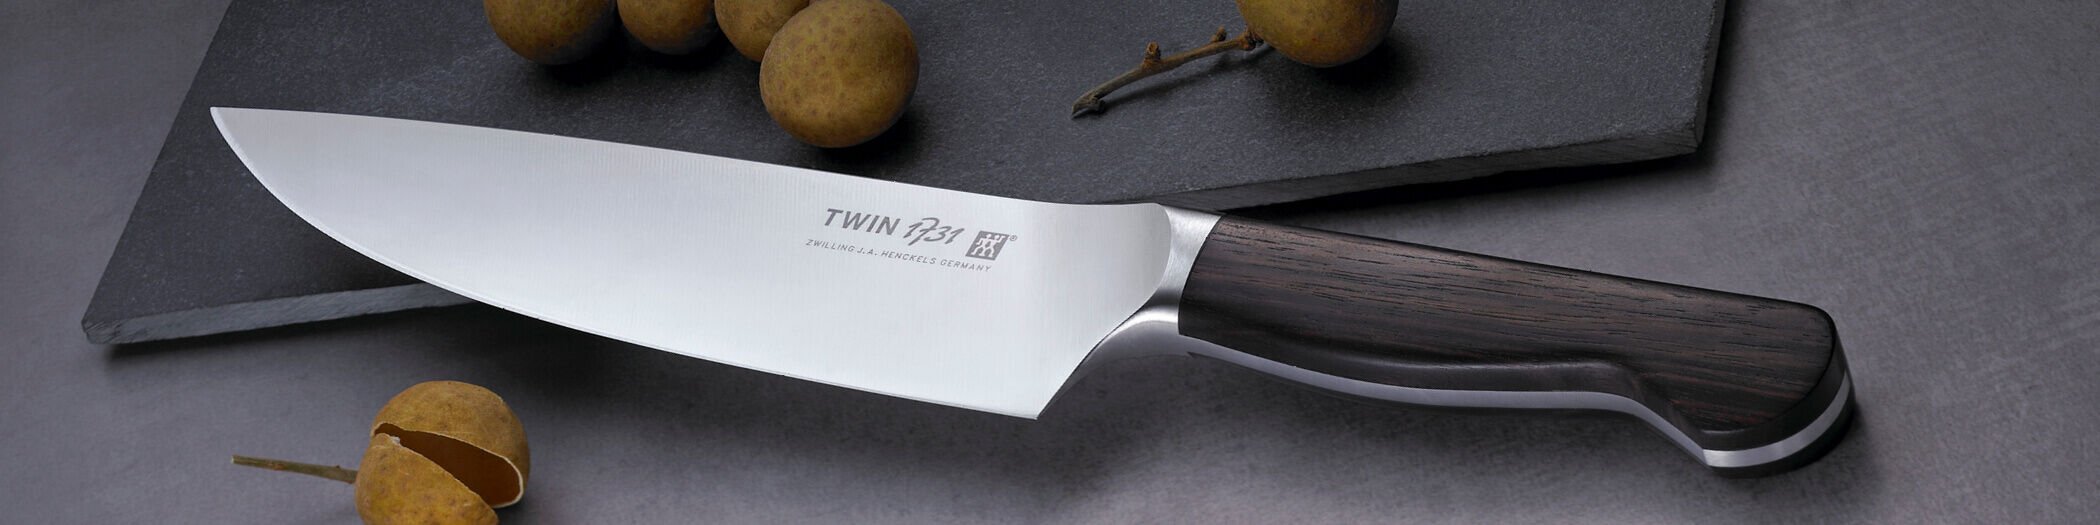 ZWILLING TWIN 1731 knives